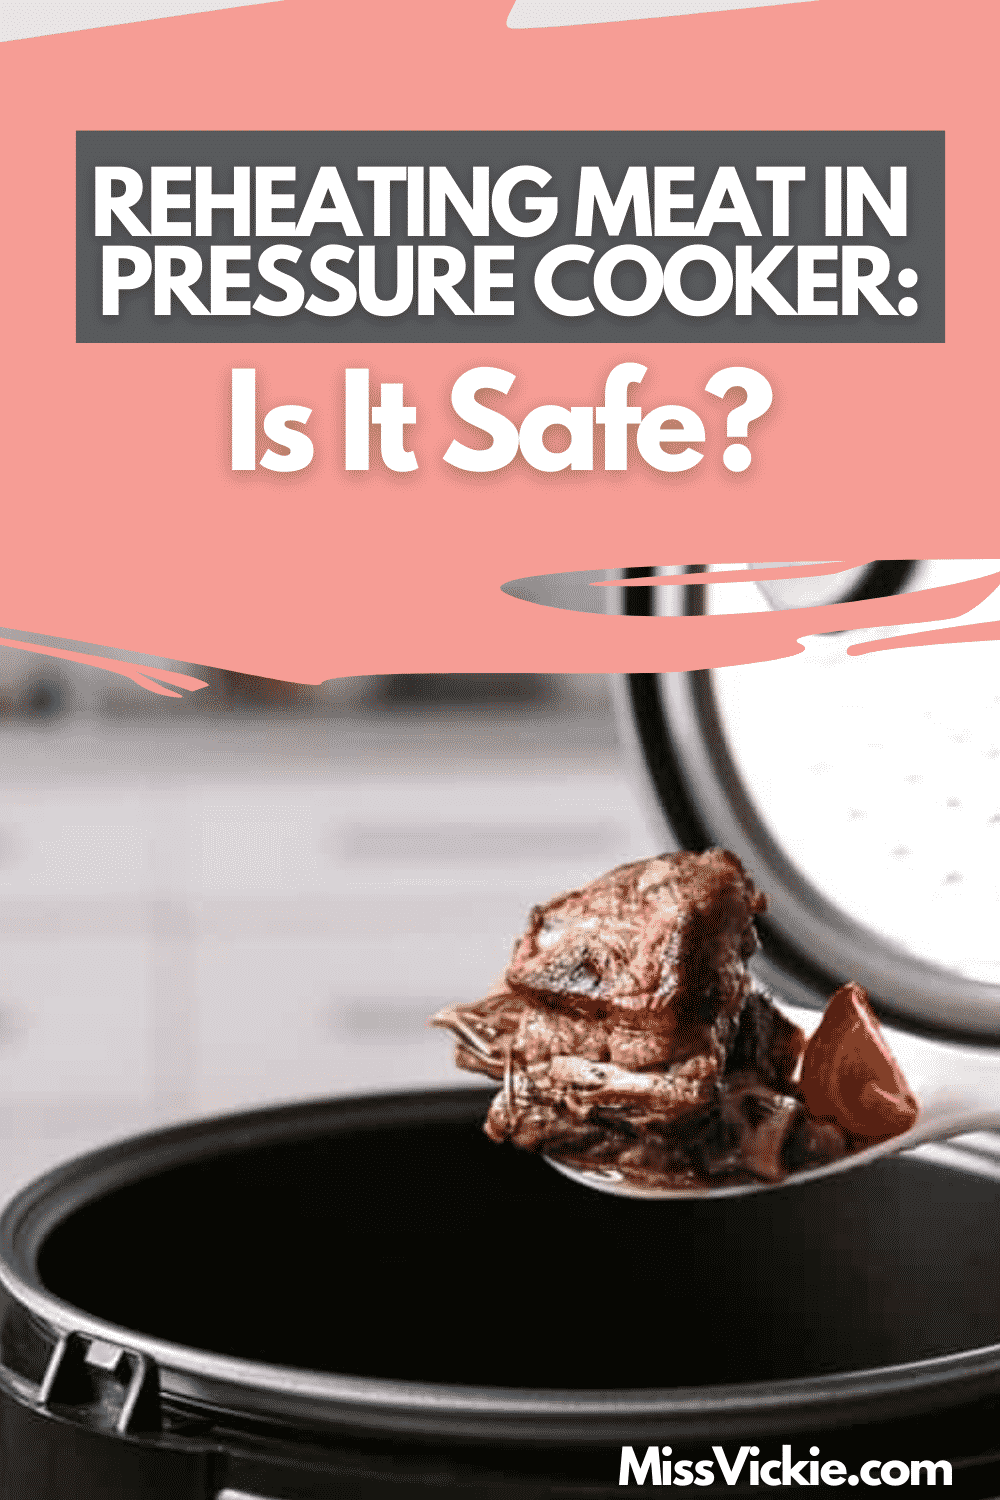 Pressure Cooker Accidents: Can A Pressure Cooker Explode?, 48% OFF